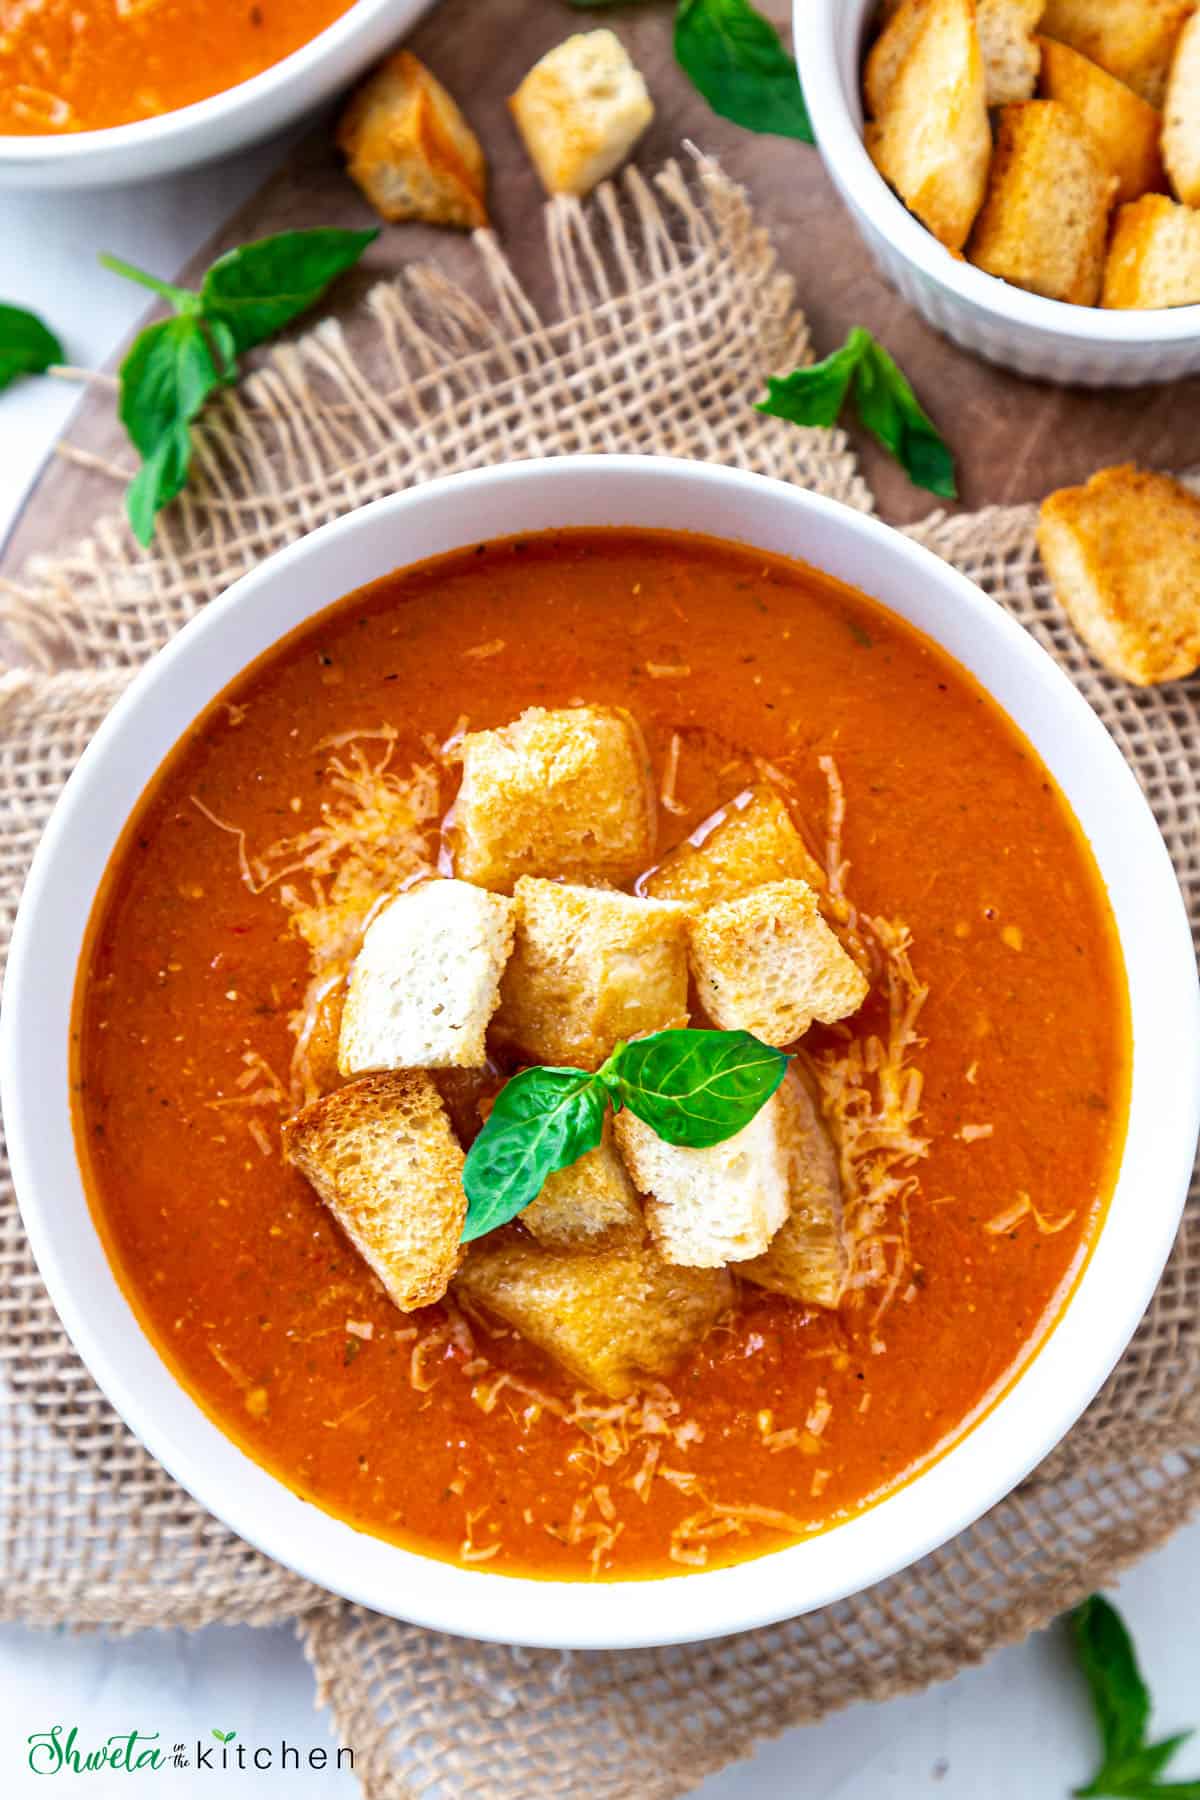 Bowl of Tomato basil soup with crouton and basil leaves placed on burlap cloth